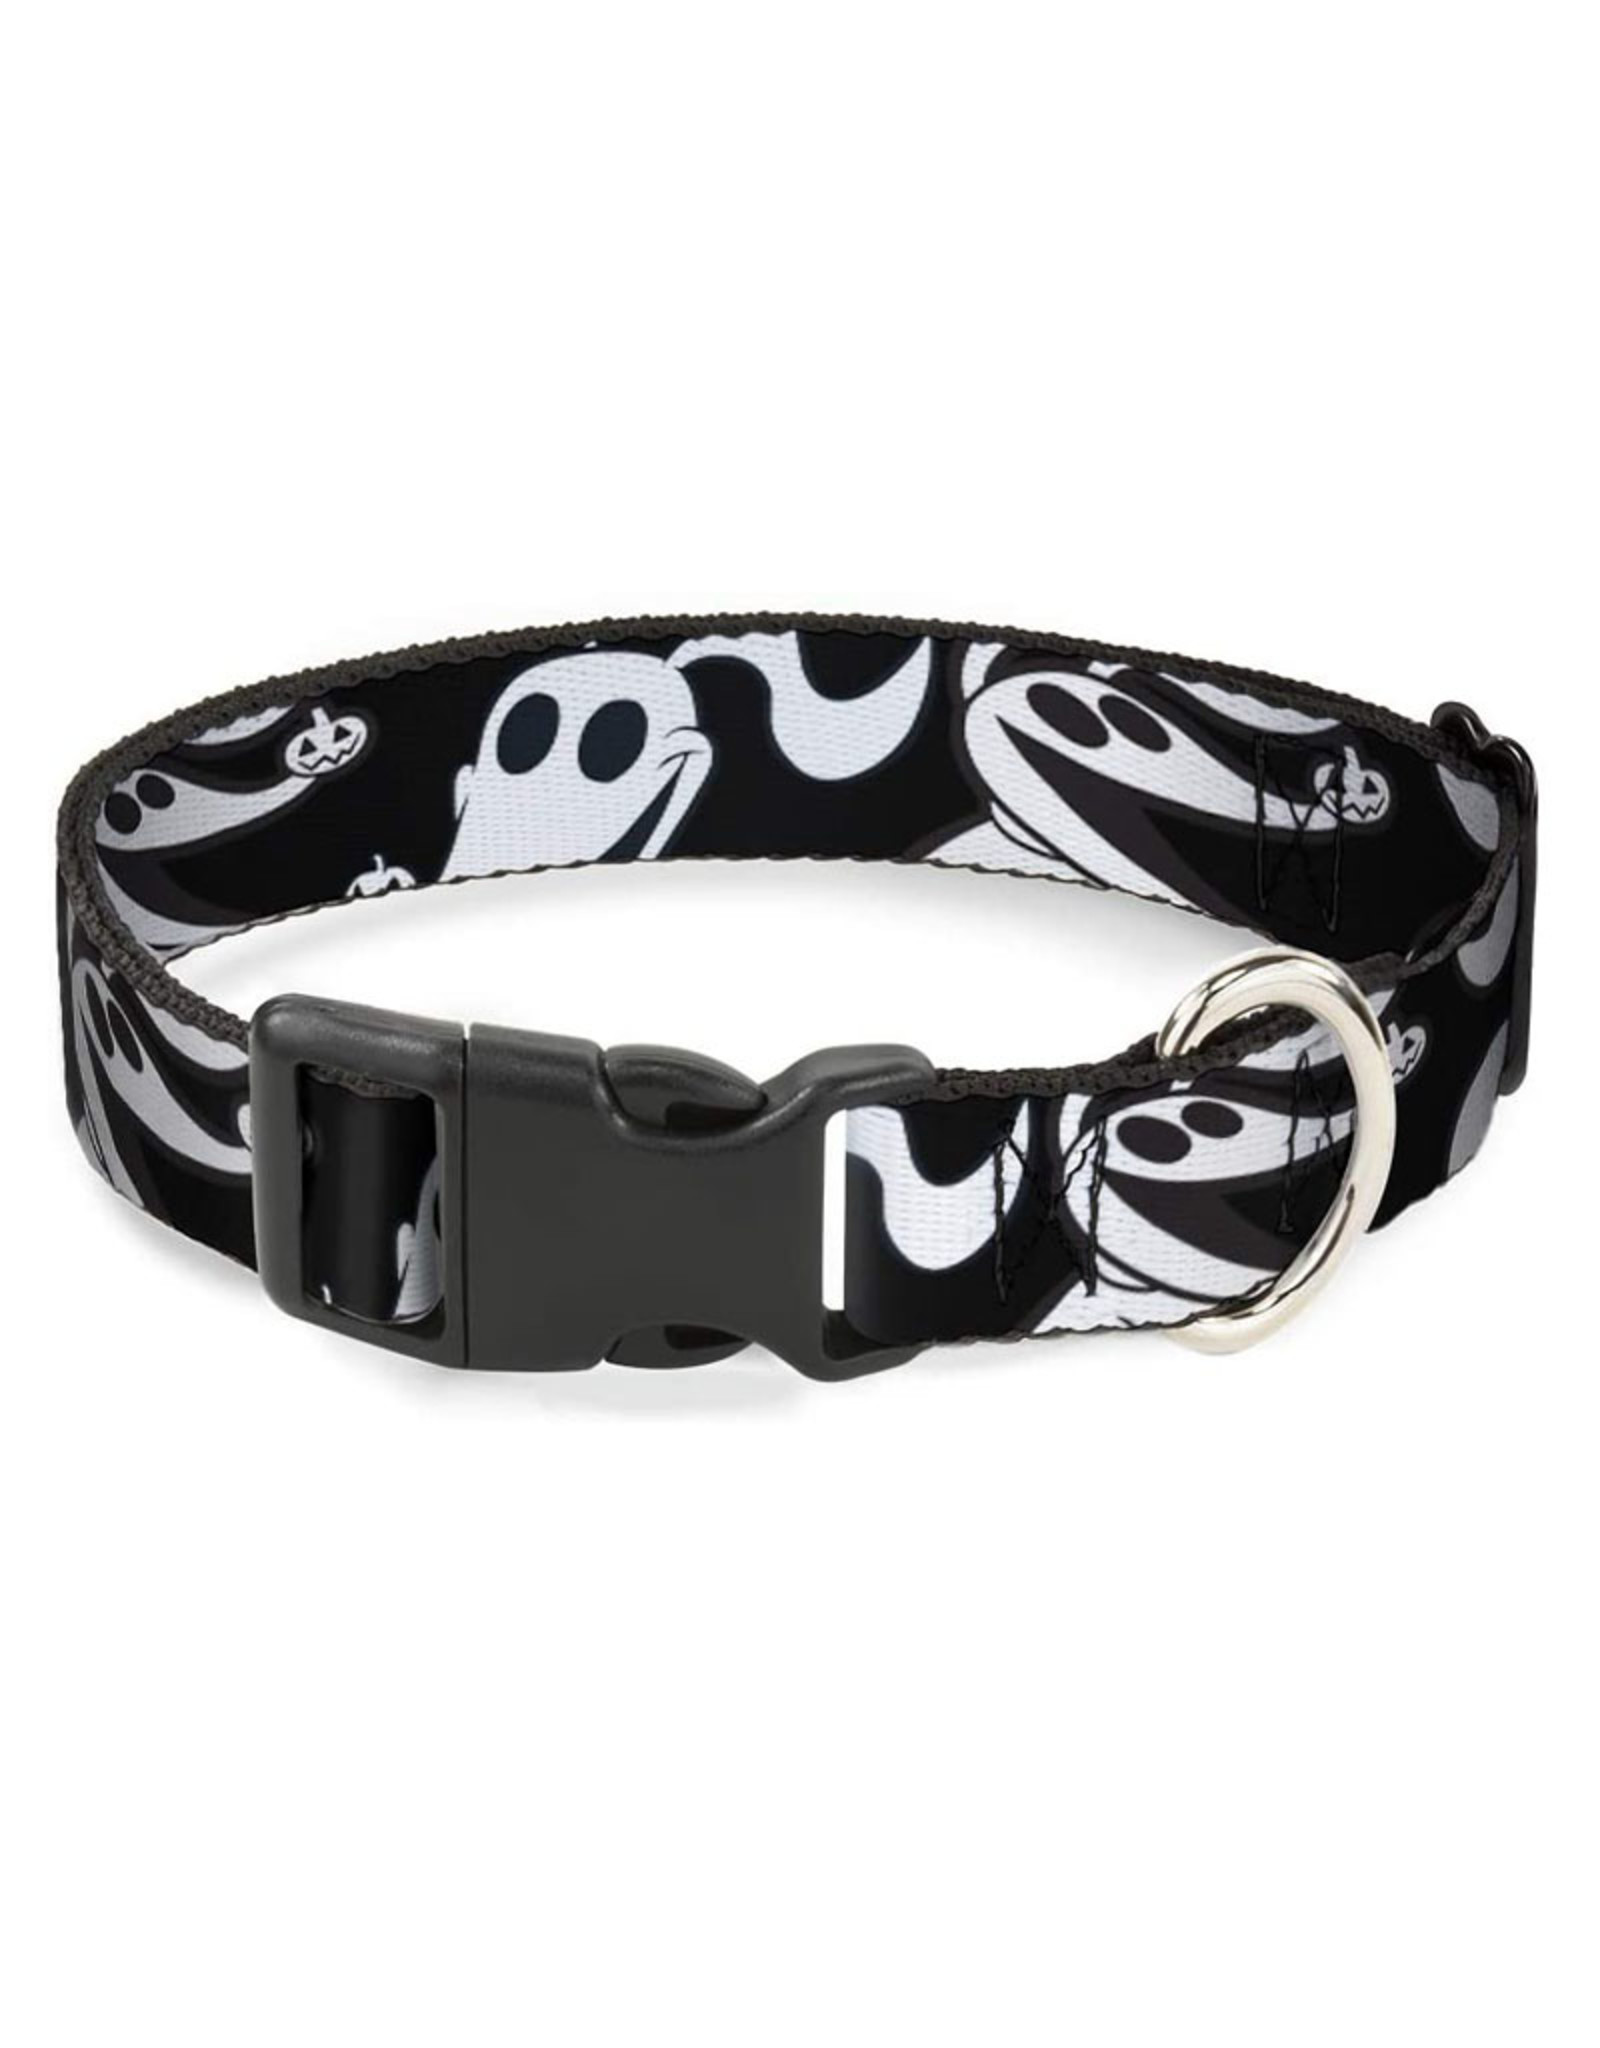 Buckle-Down Nightmare Before Christmas Zero Expressions Collar